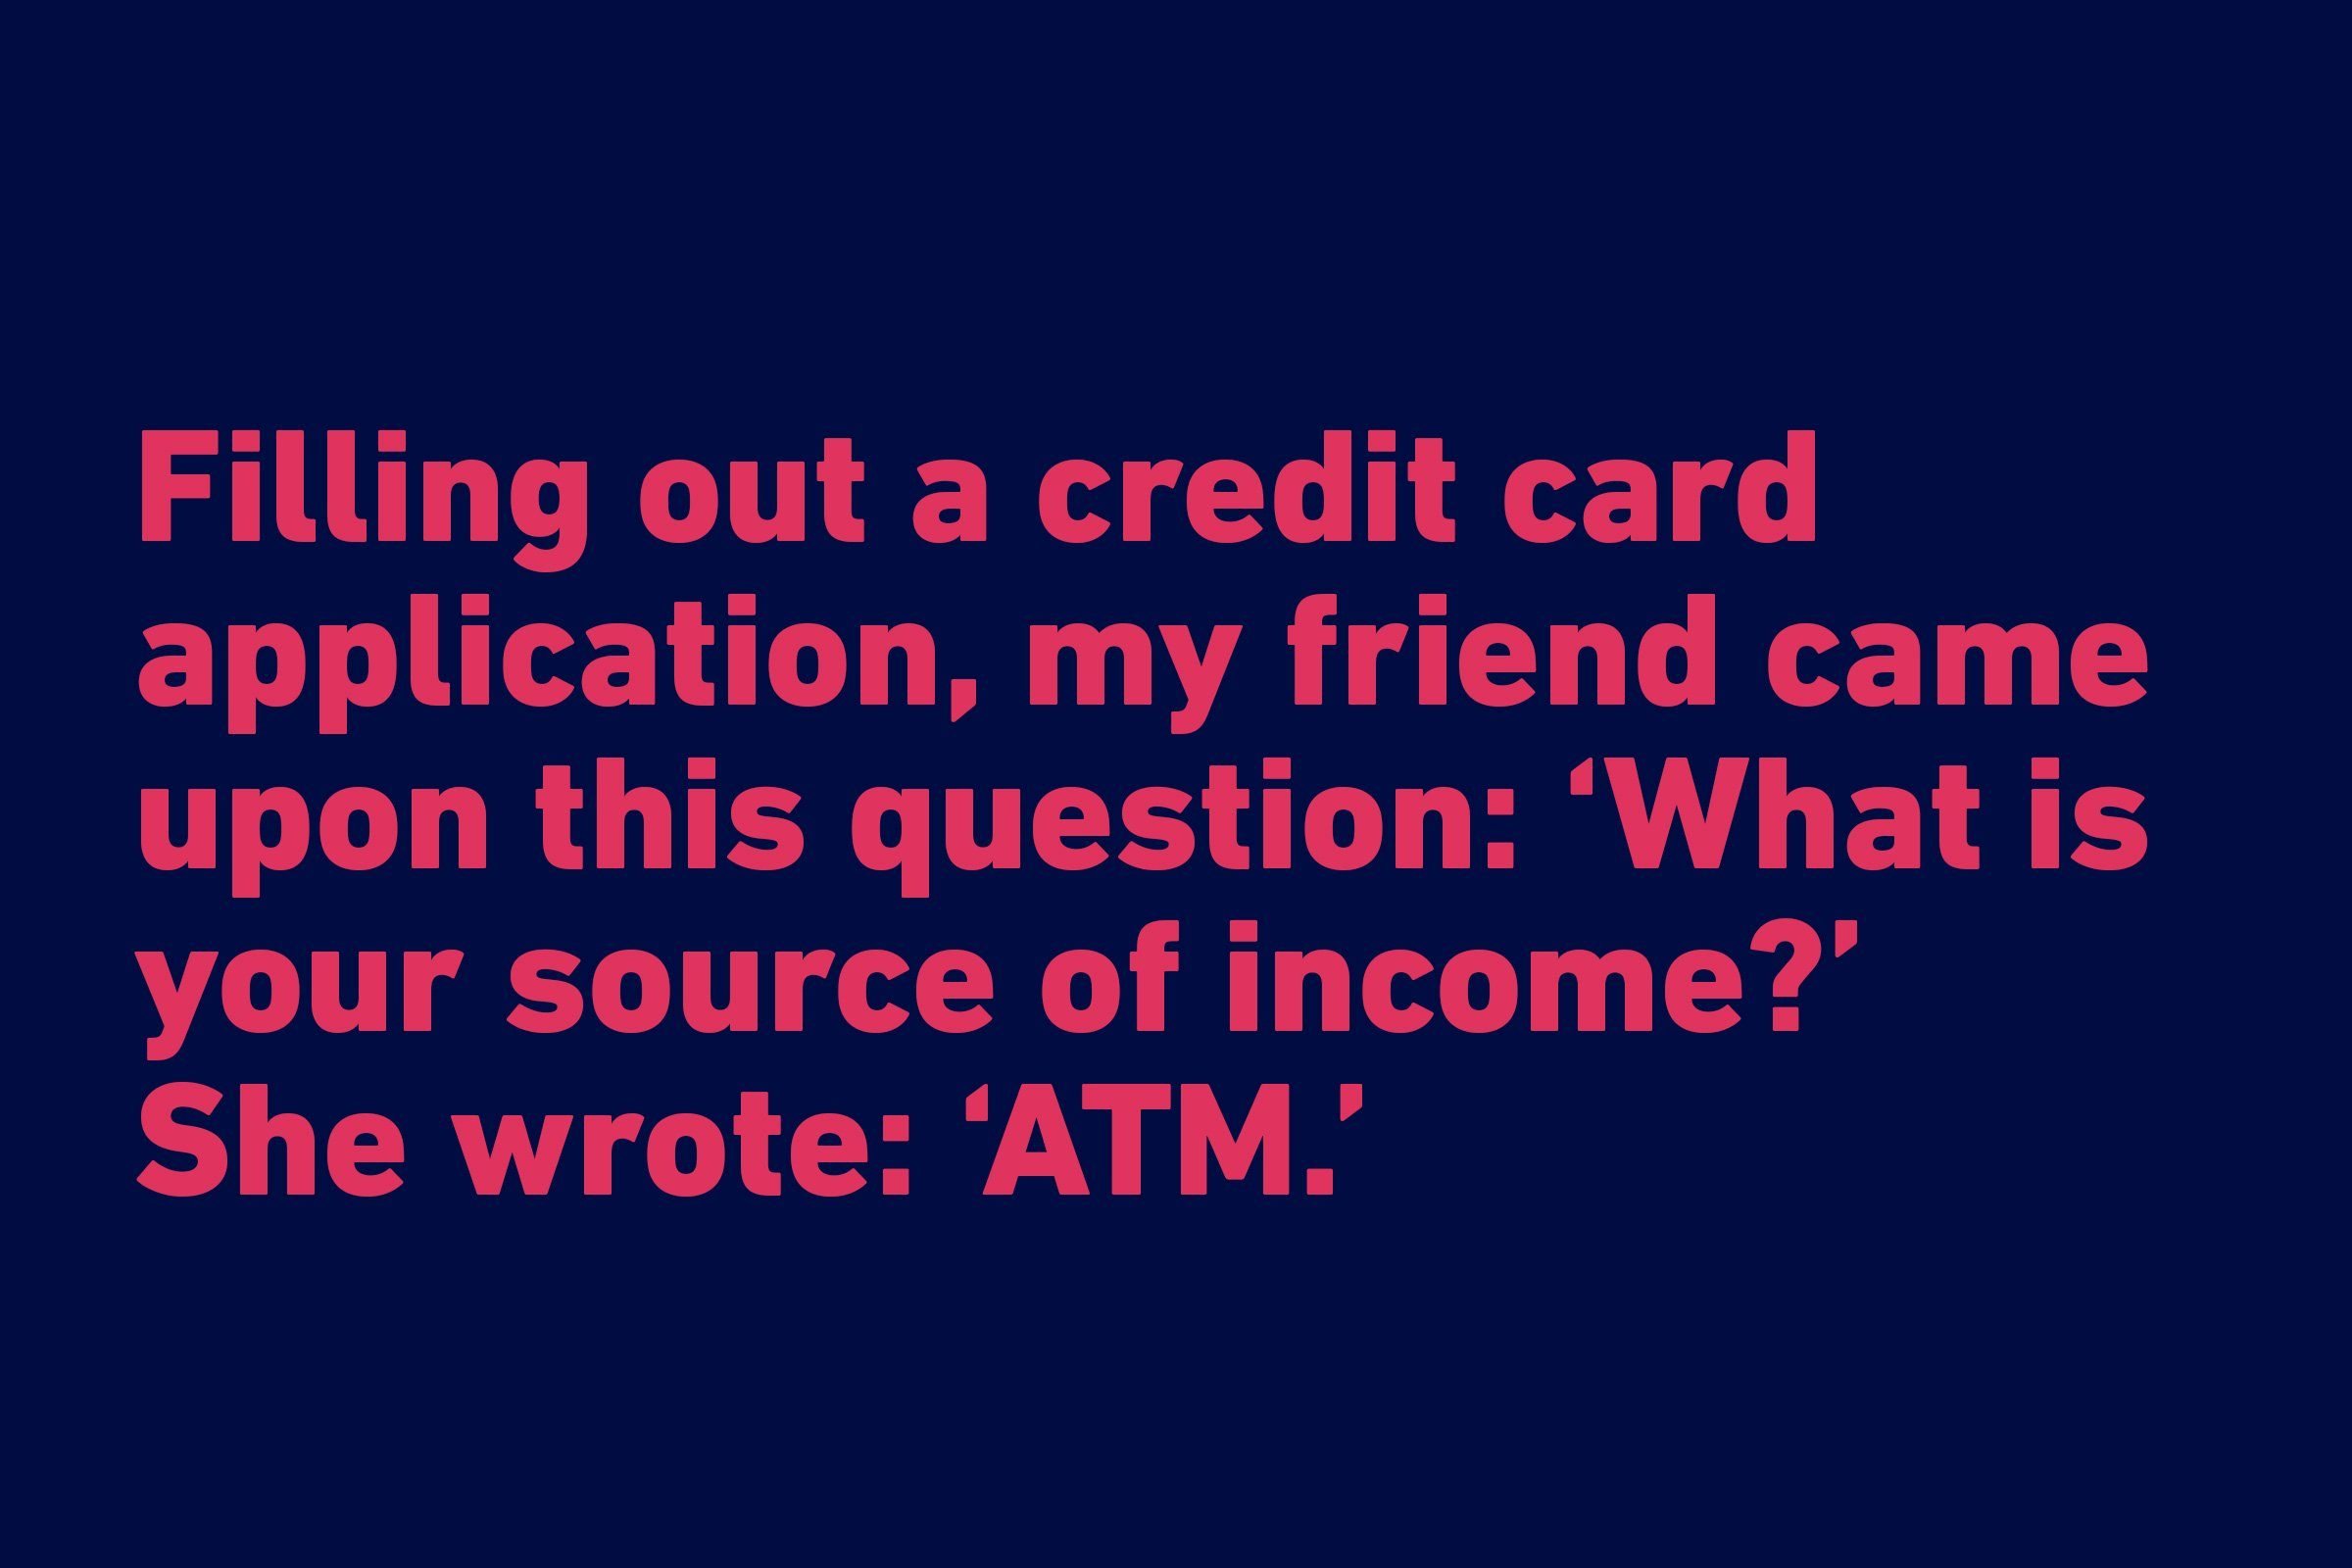 Funniest quotes of all time - ATM